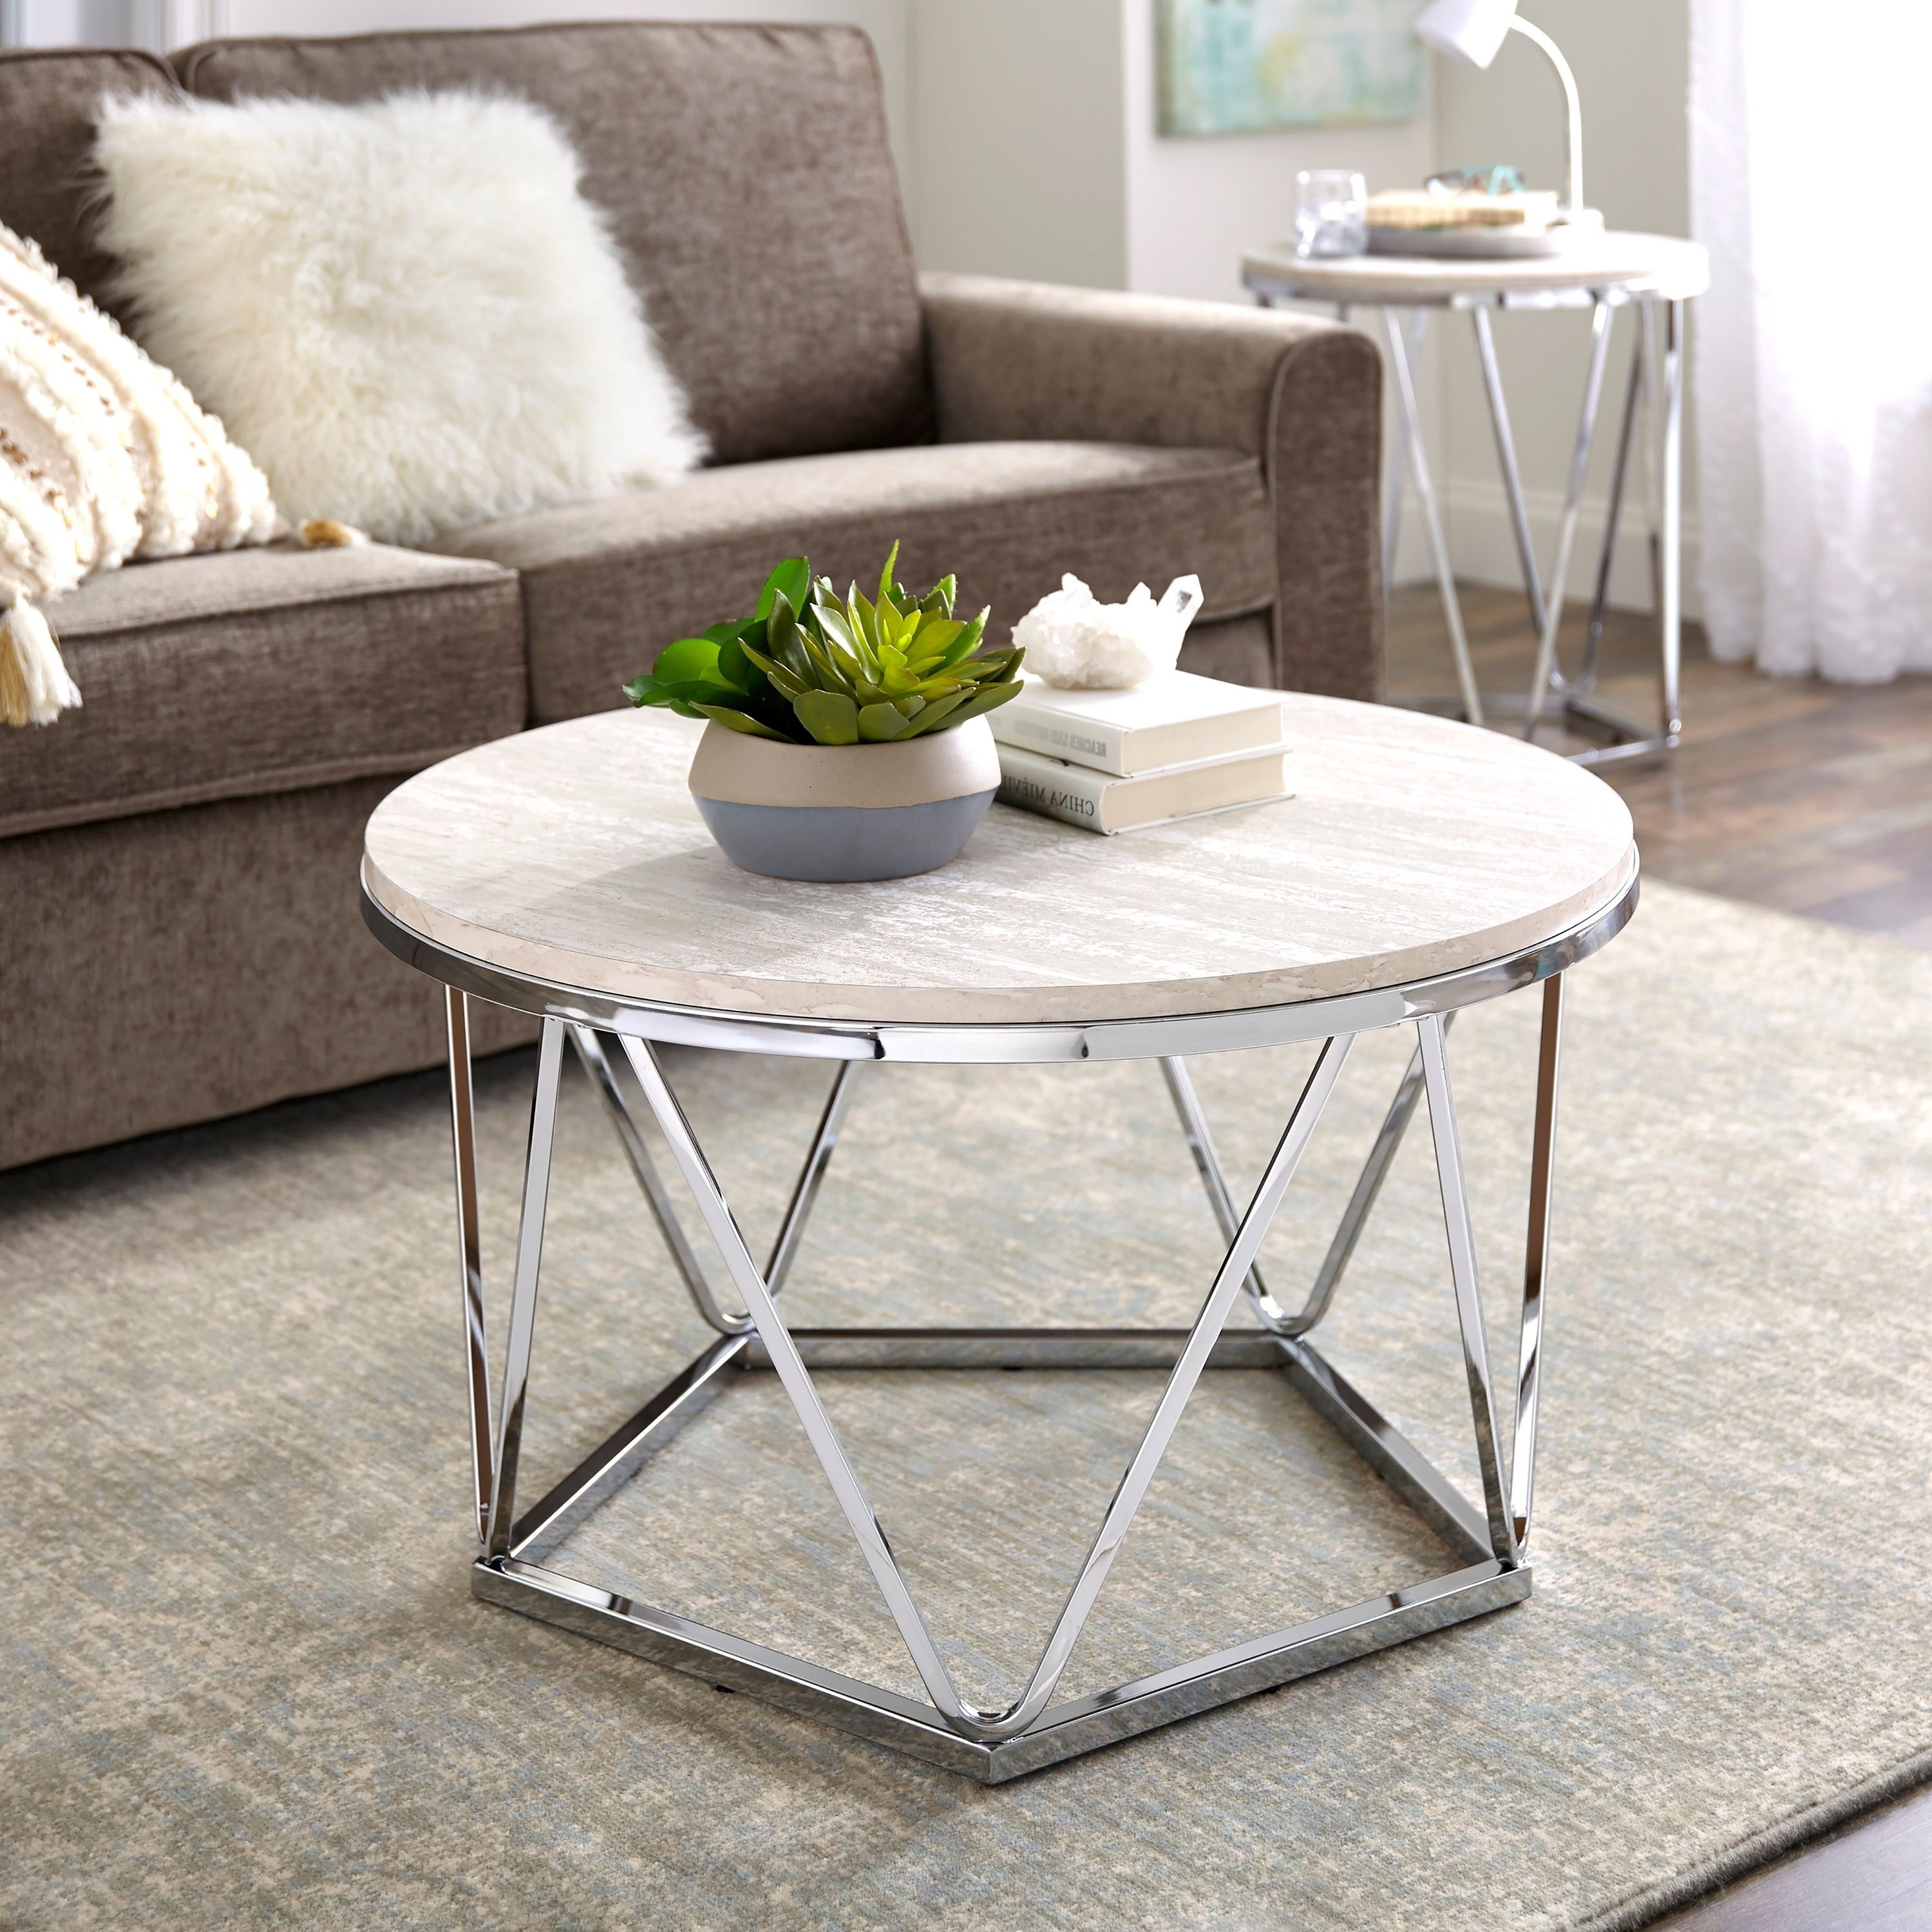 Silver Orchid Henderson Faux Stone Silvertone Round Coffee Table Within Well Known Silver Orchid Henderson Faux Stone Silvertone Round Coffee Tables (View 1 of 20)